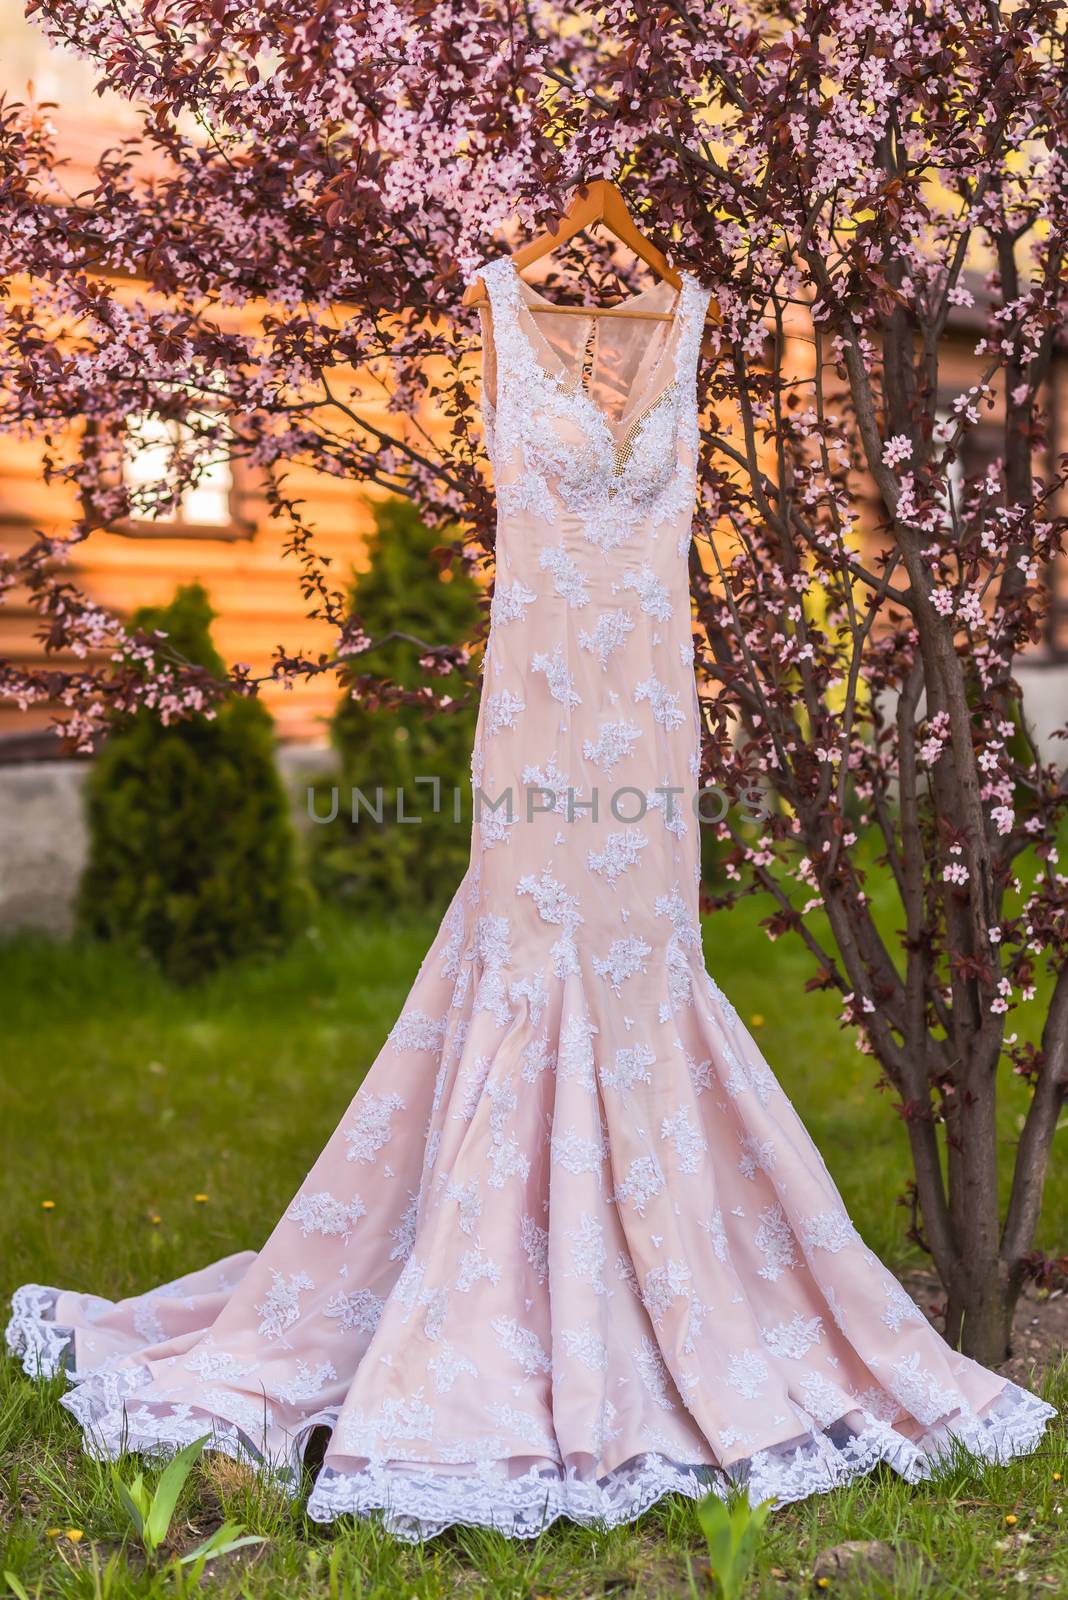 wedding dress on the tree in the wooden house